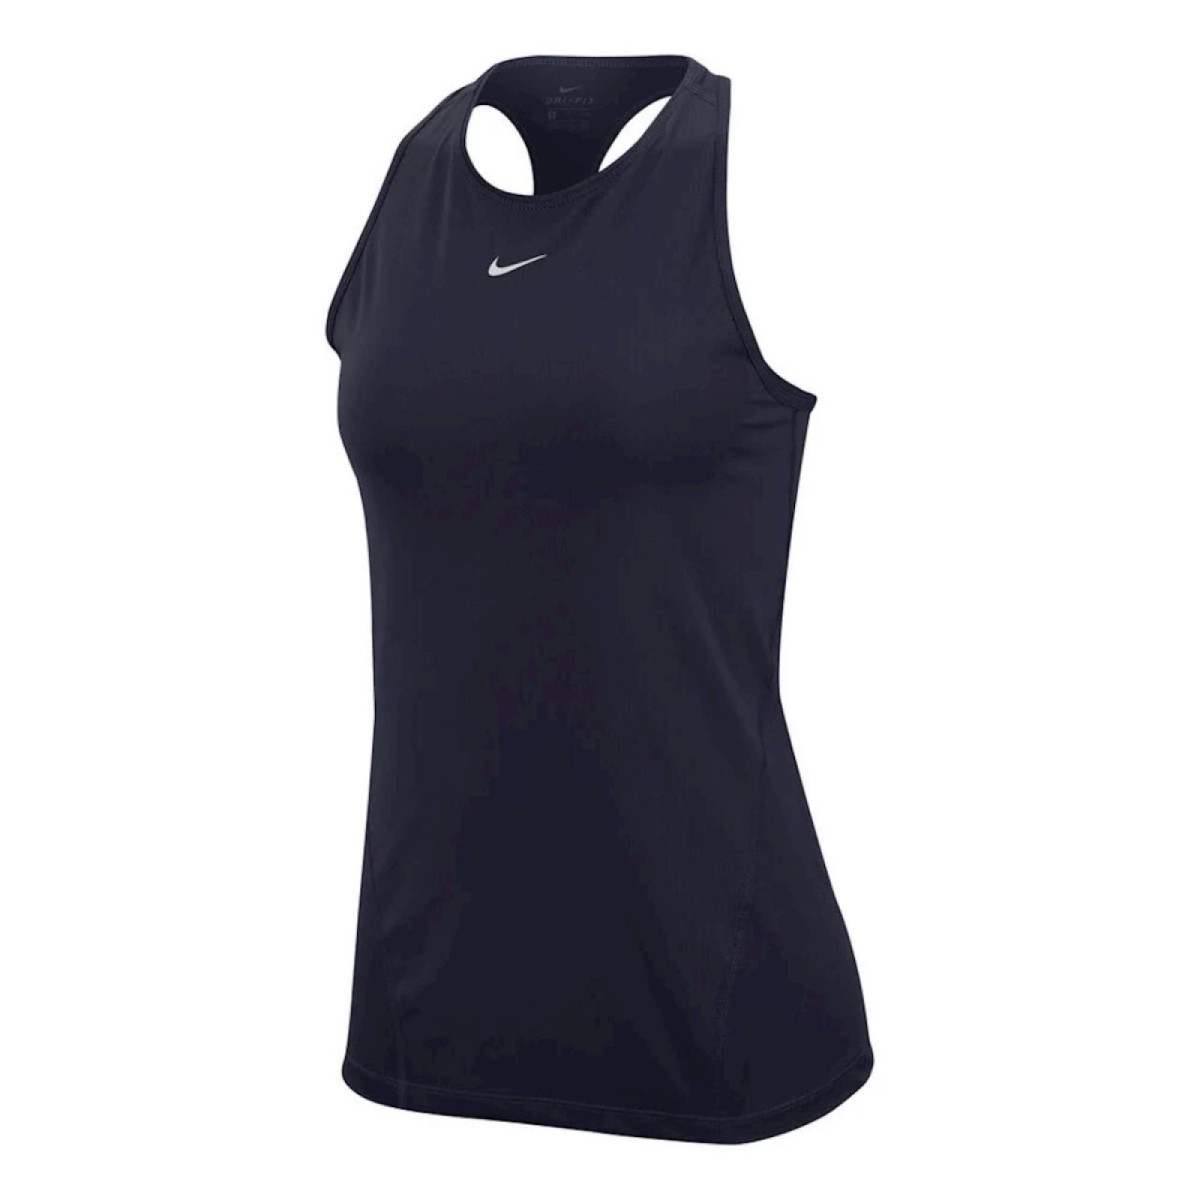 The Nike Pro Tank features all-over mesh in a flattering design. Its ...